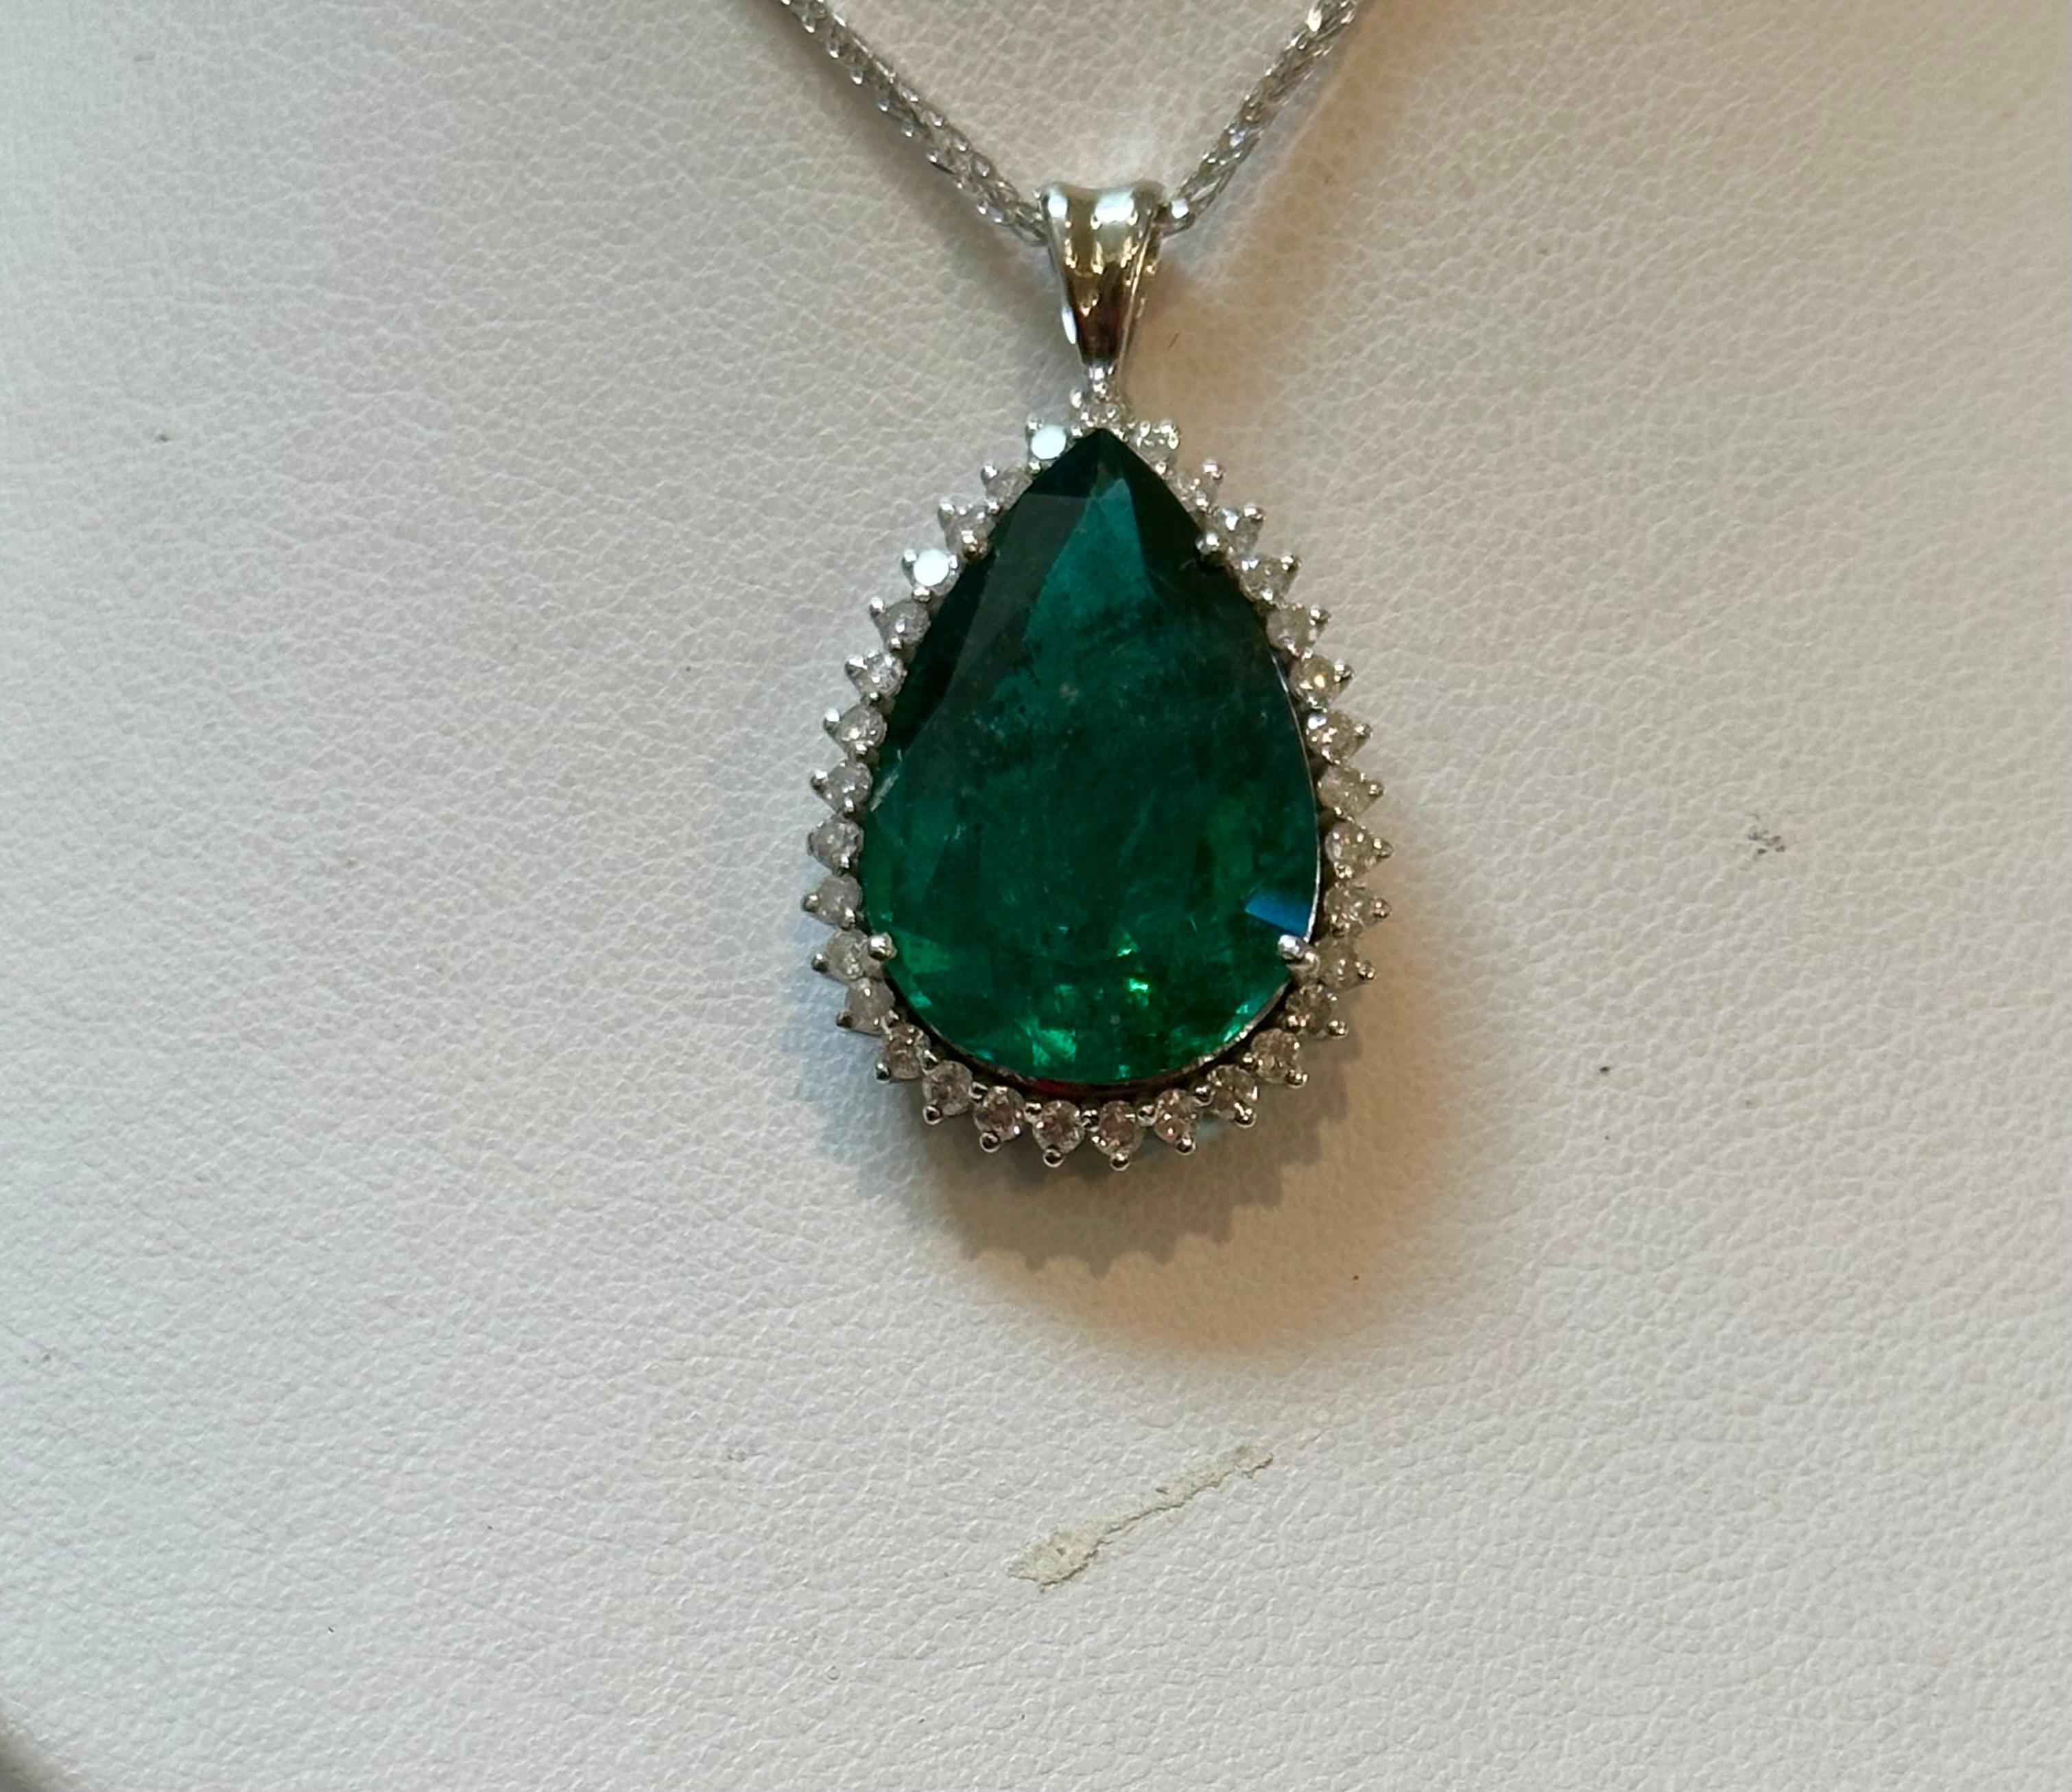 13 Ct Pear Cut Emerald & 1 Ct Diamond Halo Pendent/Necklace 14 KW Gold Chain 5